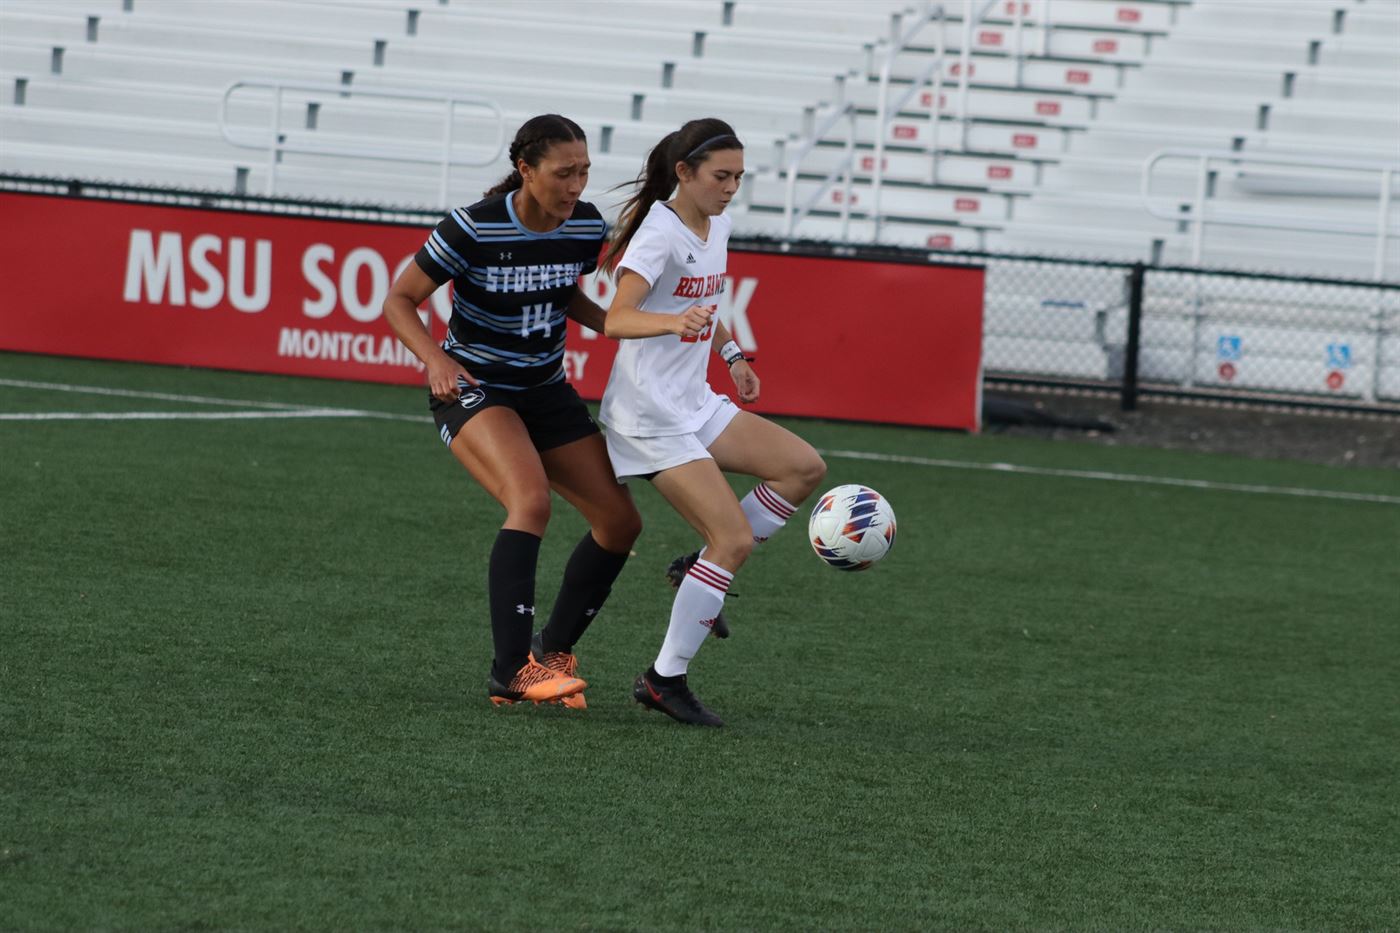 Freshman Kylie Prendergast scored her fourth goal of the season in this game, and is making a mark already in her first year. Trevor Giesberg | The Montclarion